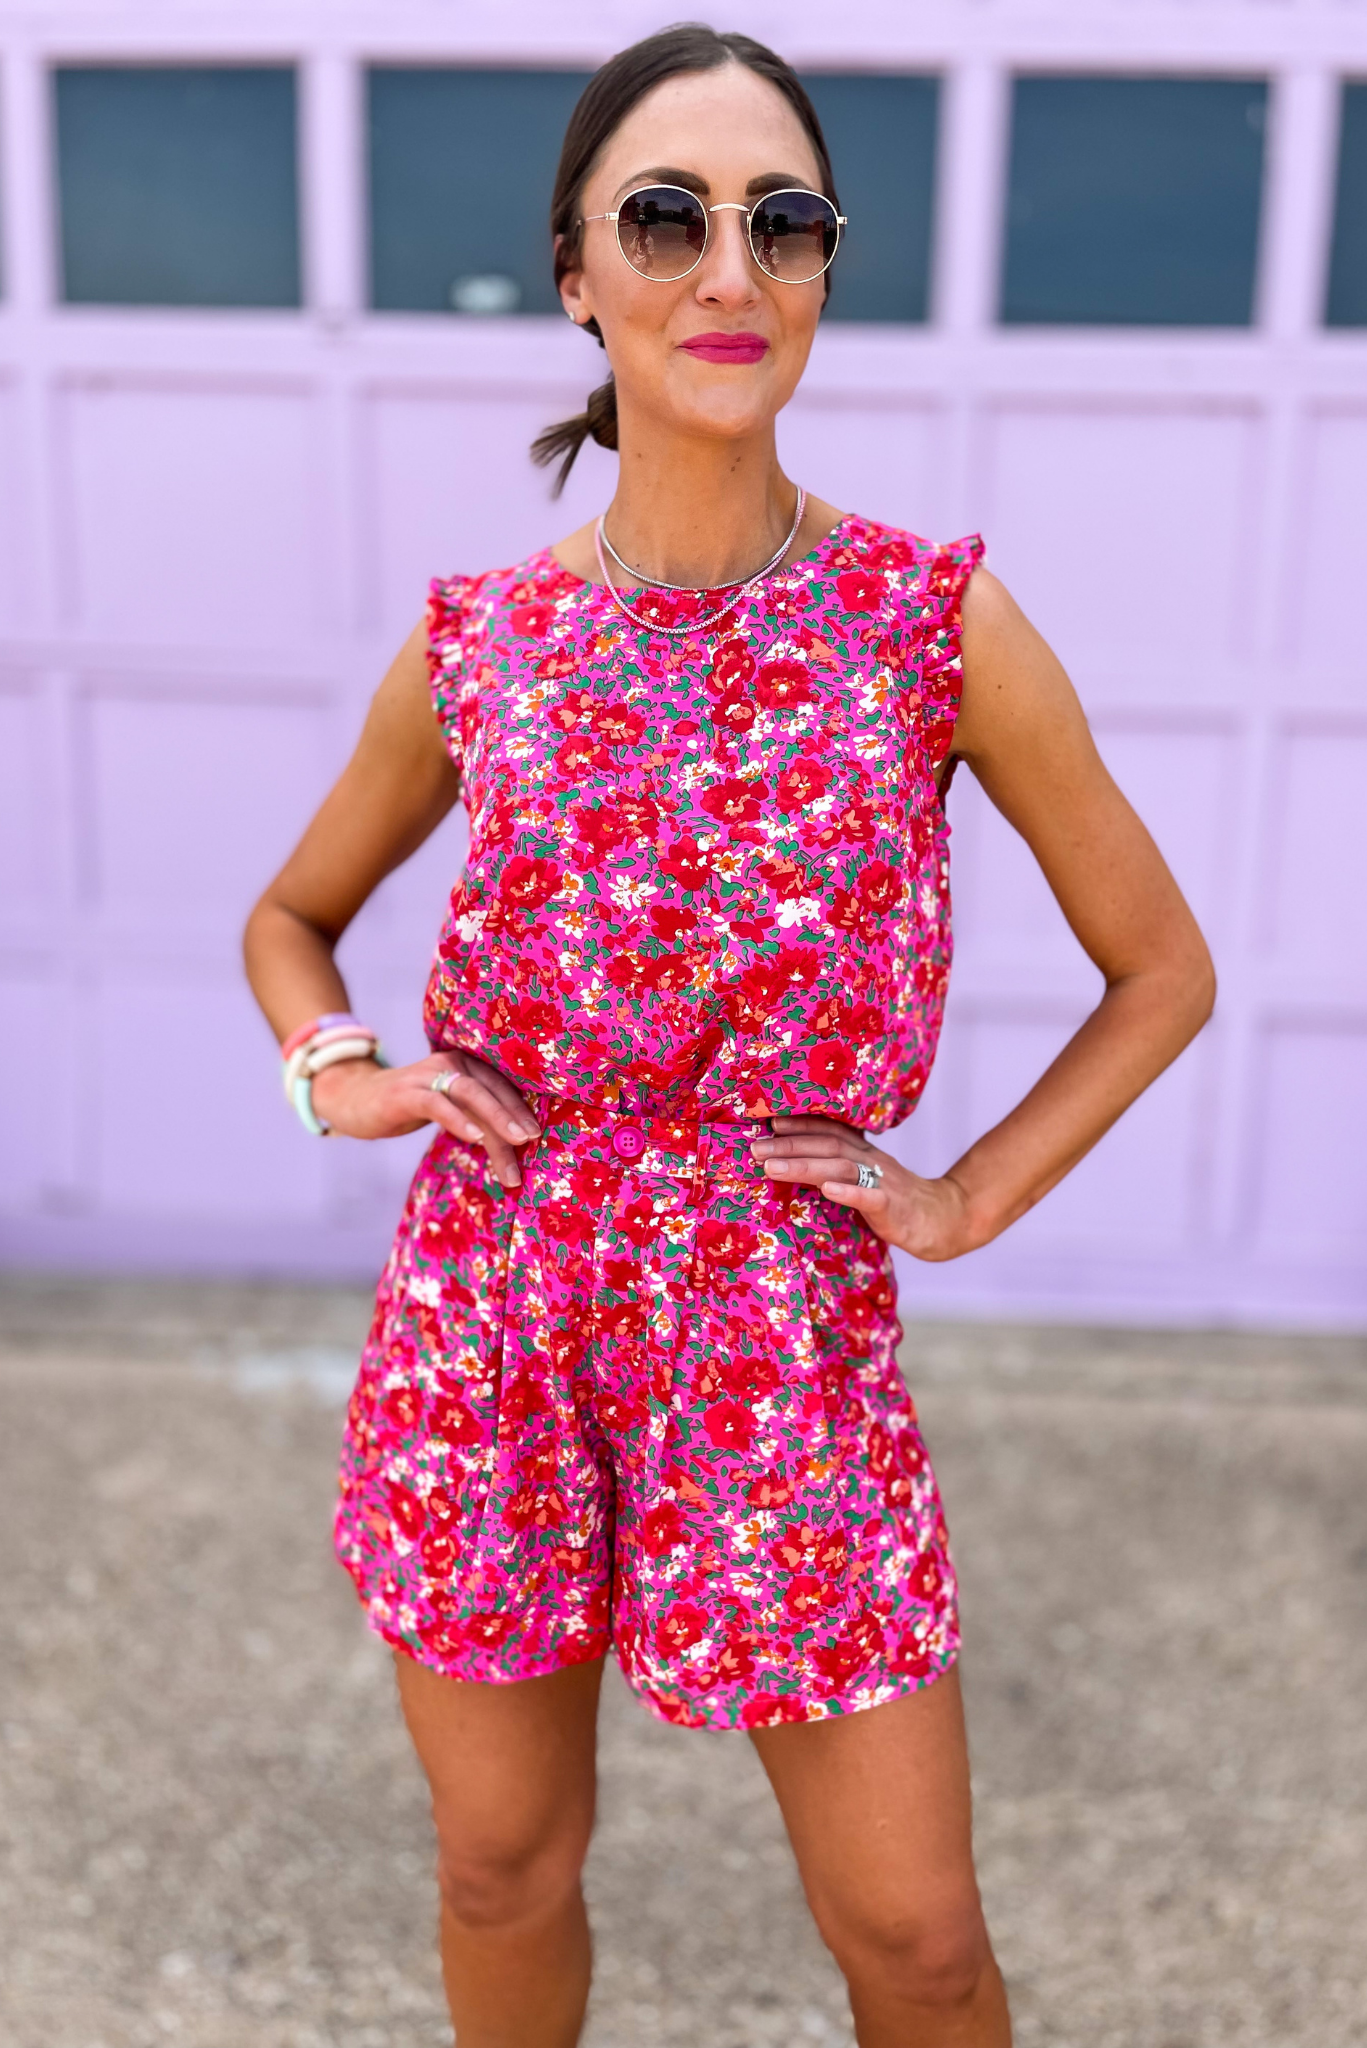 Load image into Gallery viewer, Hot Pink Floral Print Ruffle Shoulder Sleeveless Top, floral shorts, floral top, smocked waist, matching set, set, floral print, spring outfit, shop style your senses by mallory fitzsimmons
